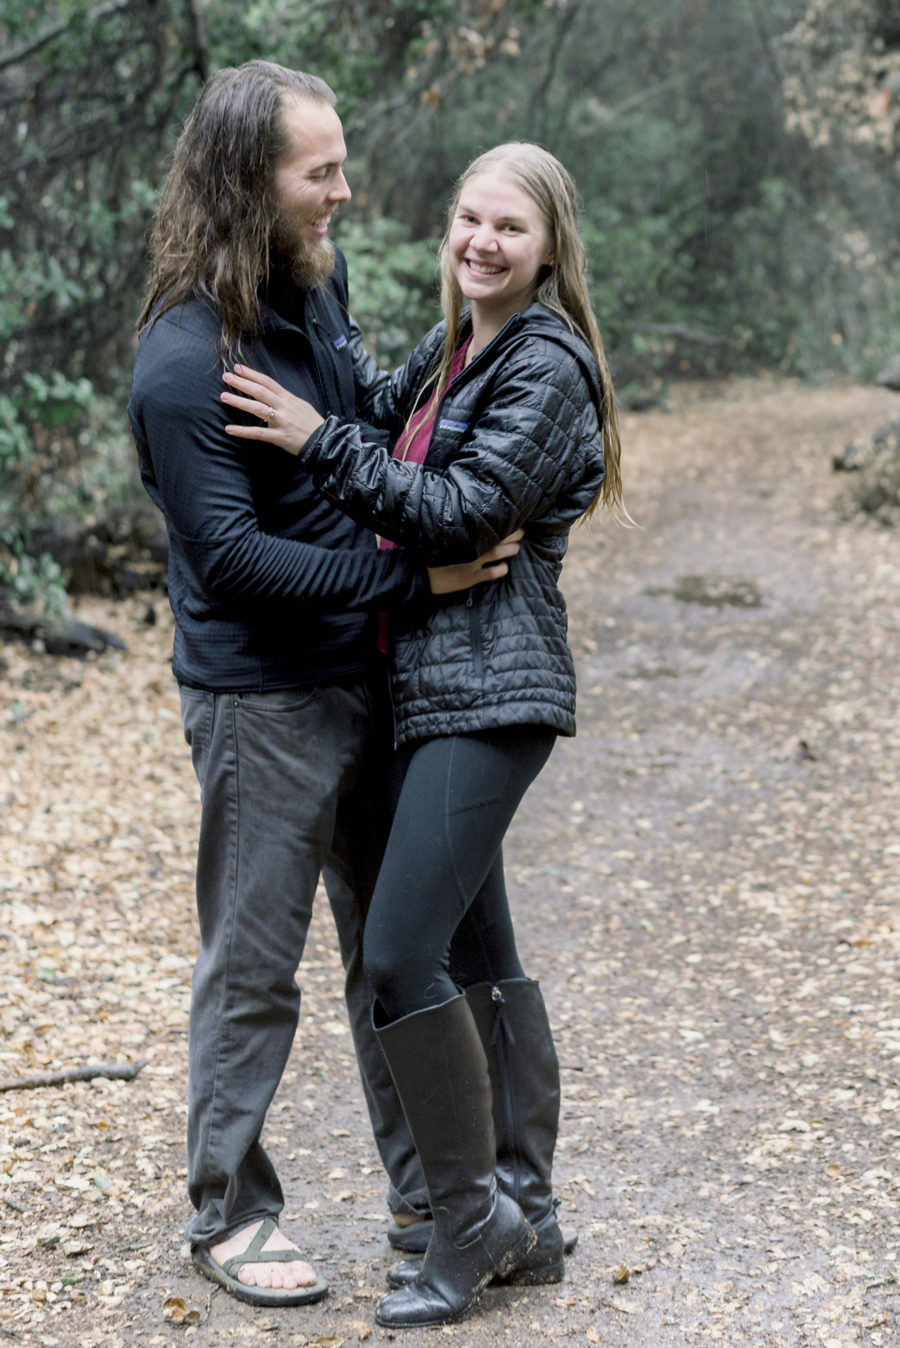 Rainy Day Engagement Session in Big Bear Victoria Parker05